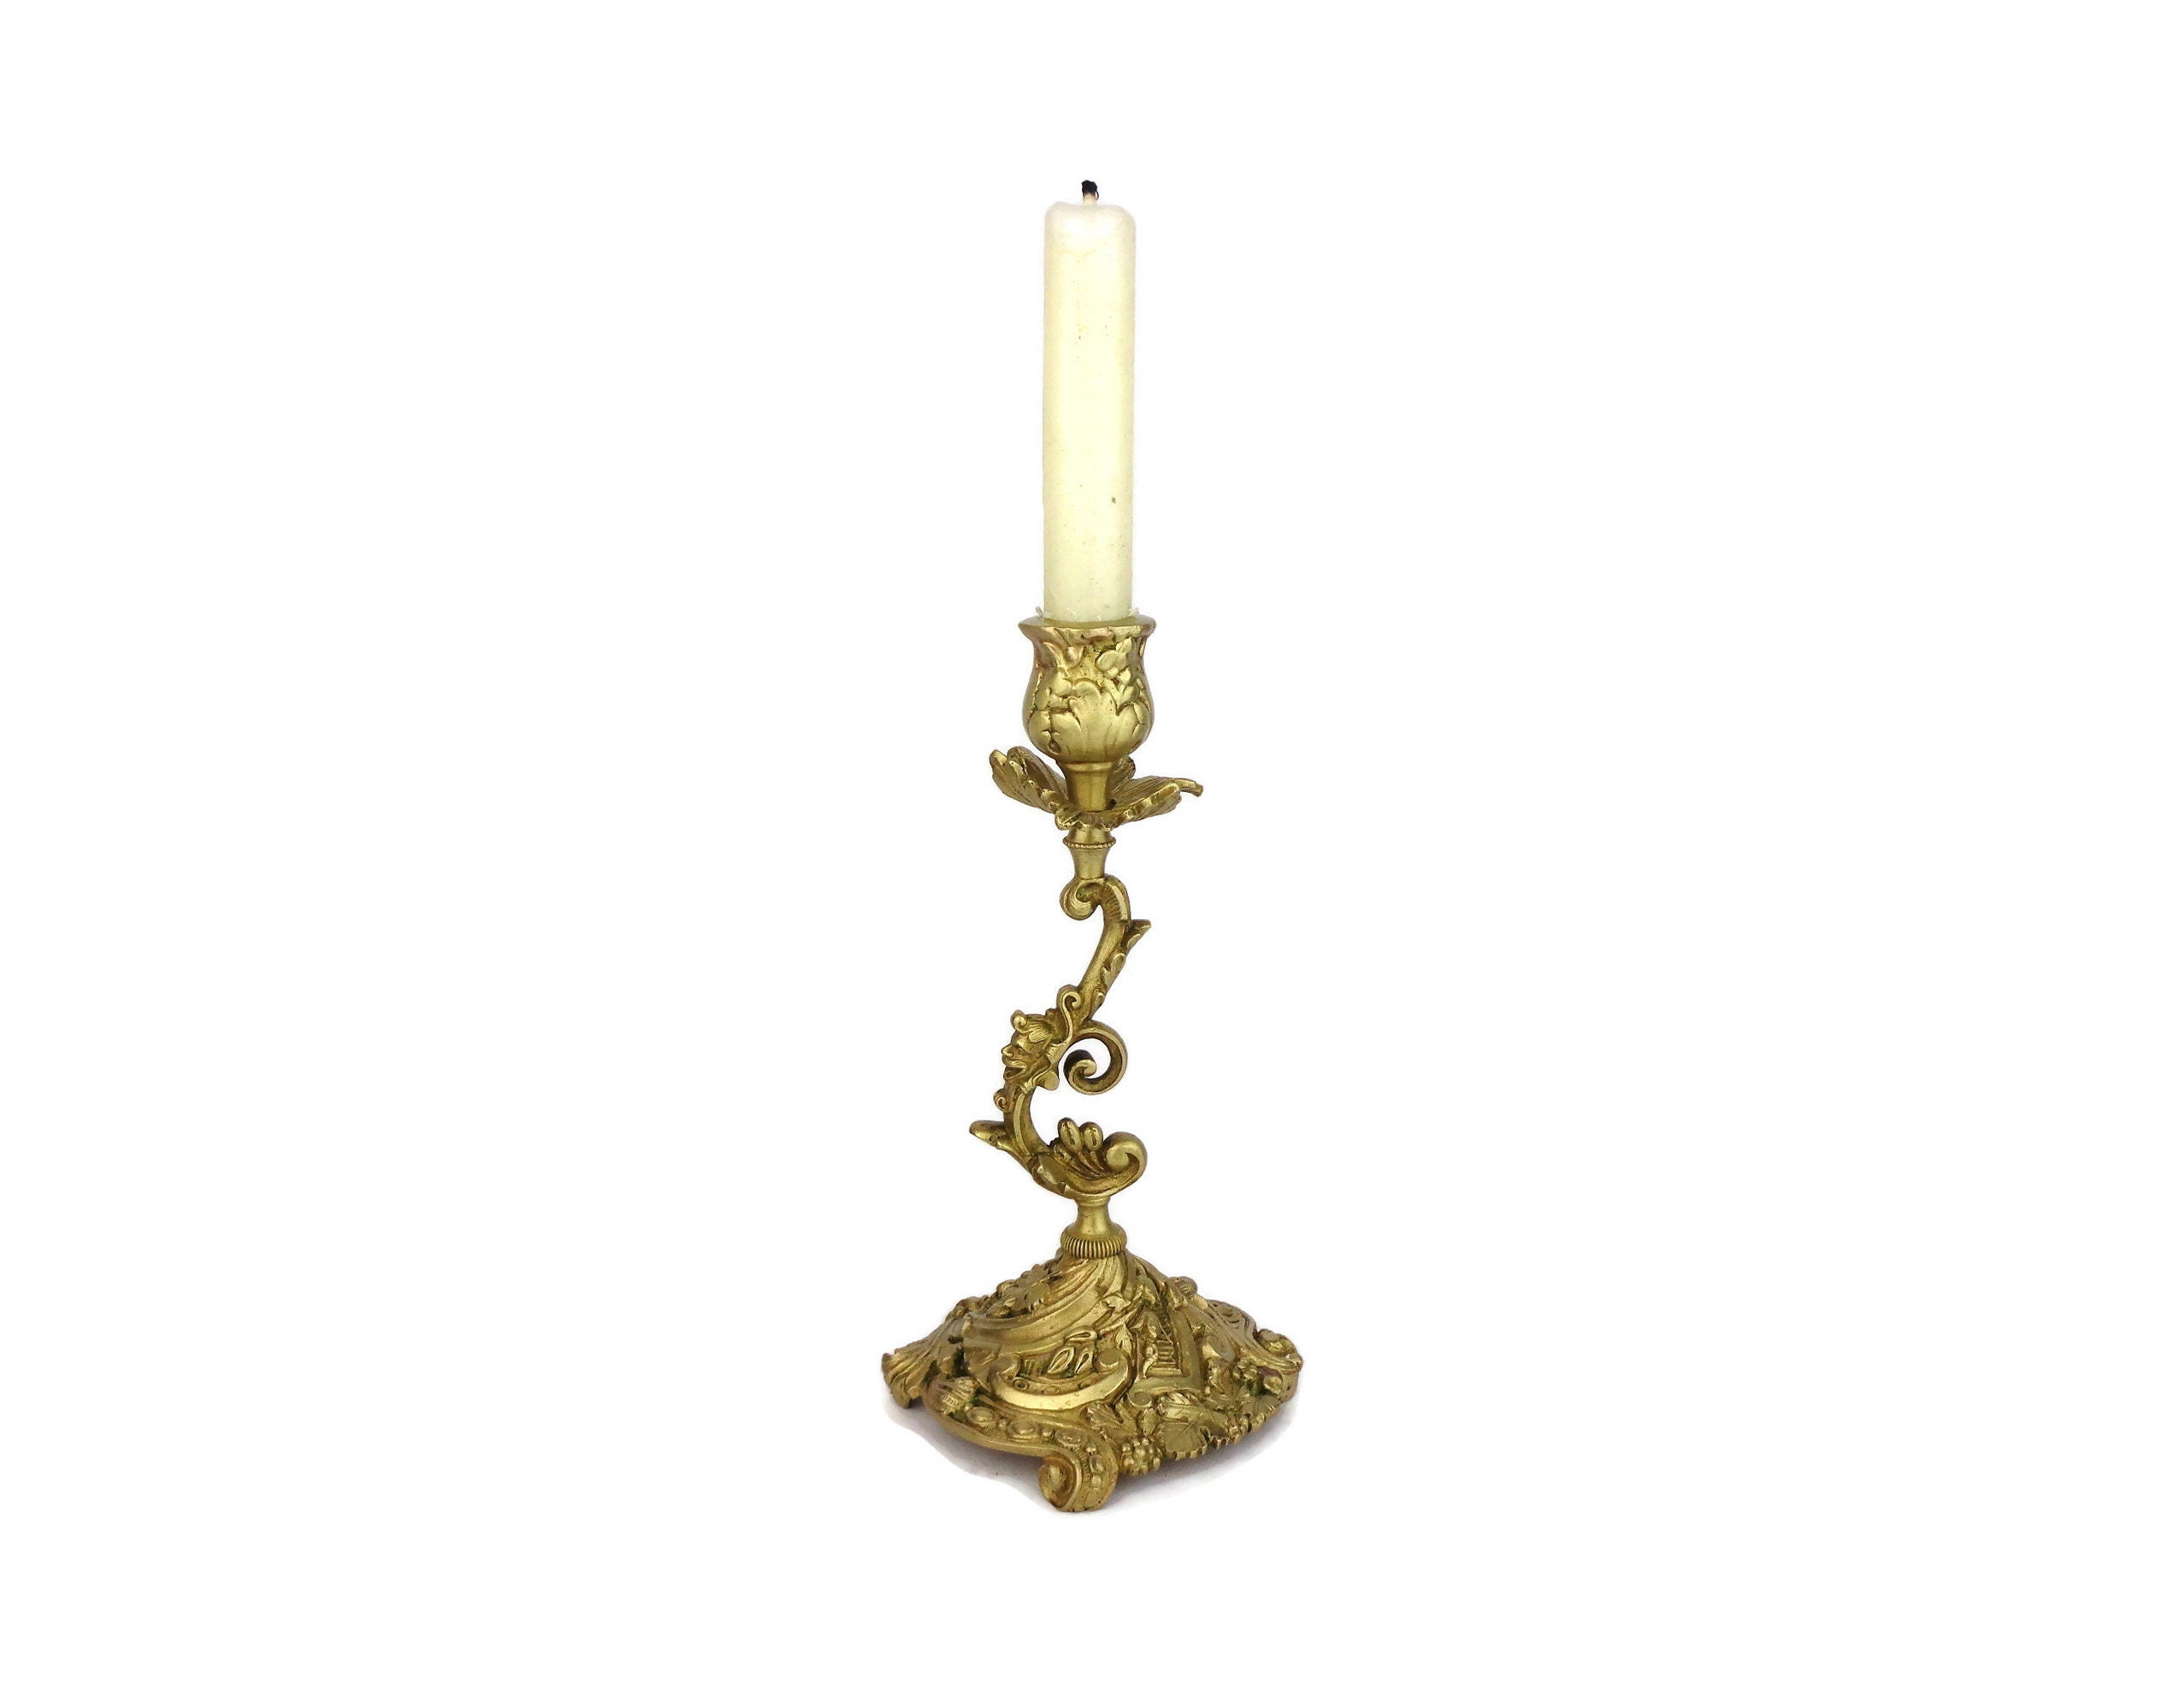 buy good quality Antique Antique Brass Candle Holder, Candle Vintage Brass  Brass Candlestick, Victorian Holder Candle Holder 